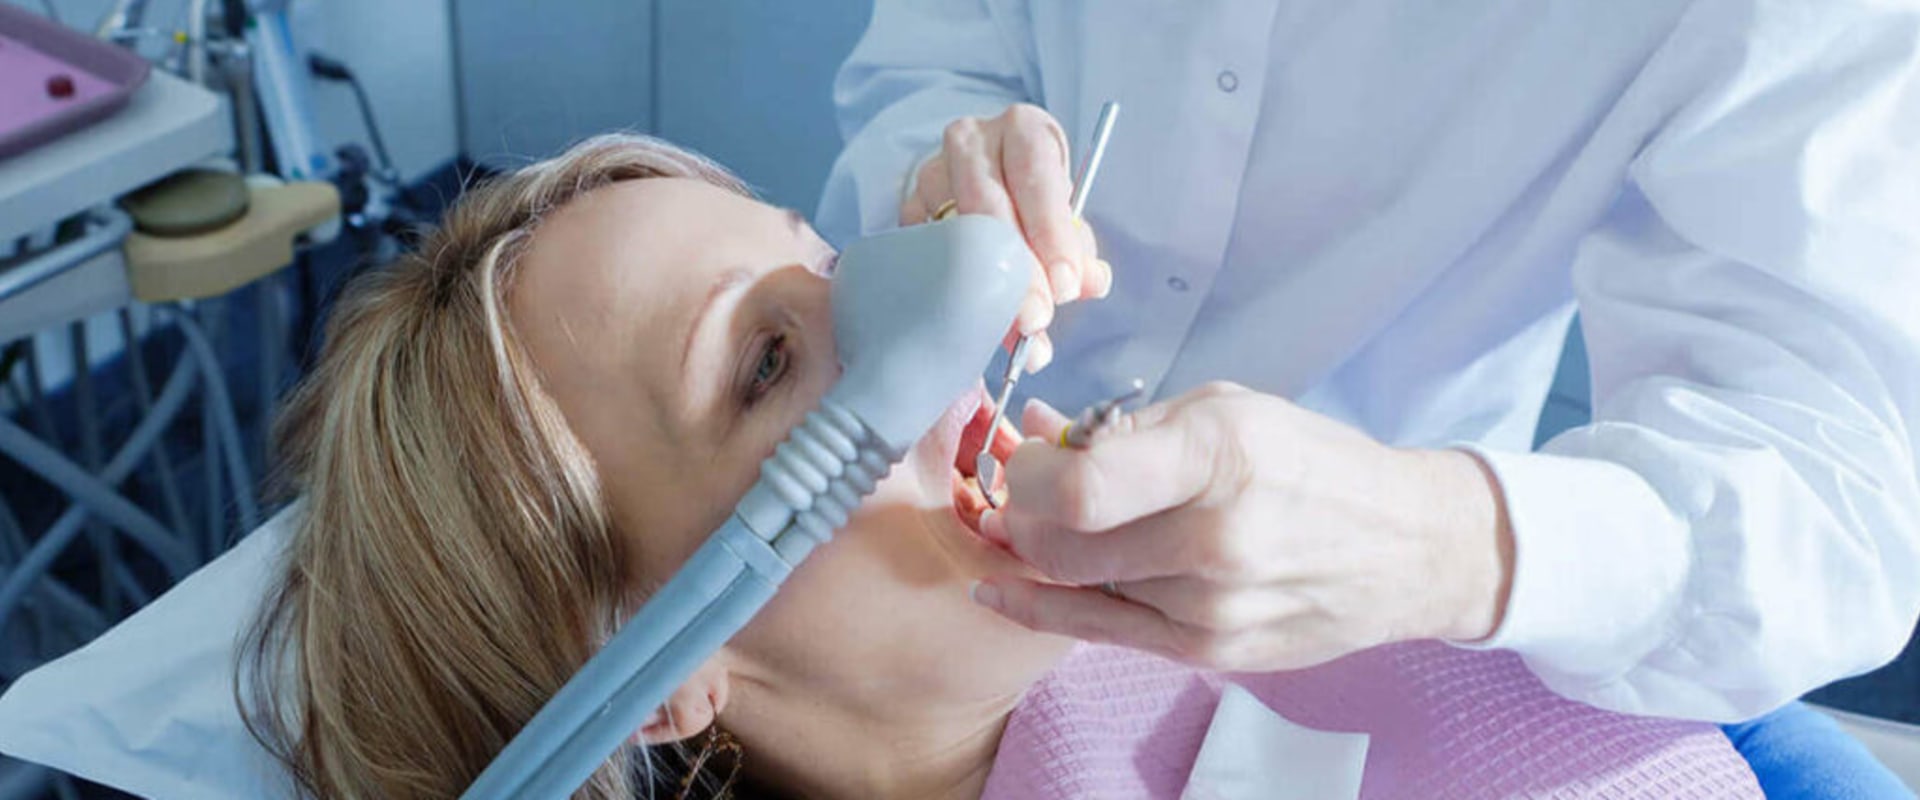 Reduced Need for Local Anesthesia in Sedation Dentistry